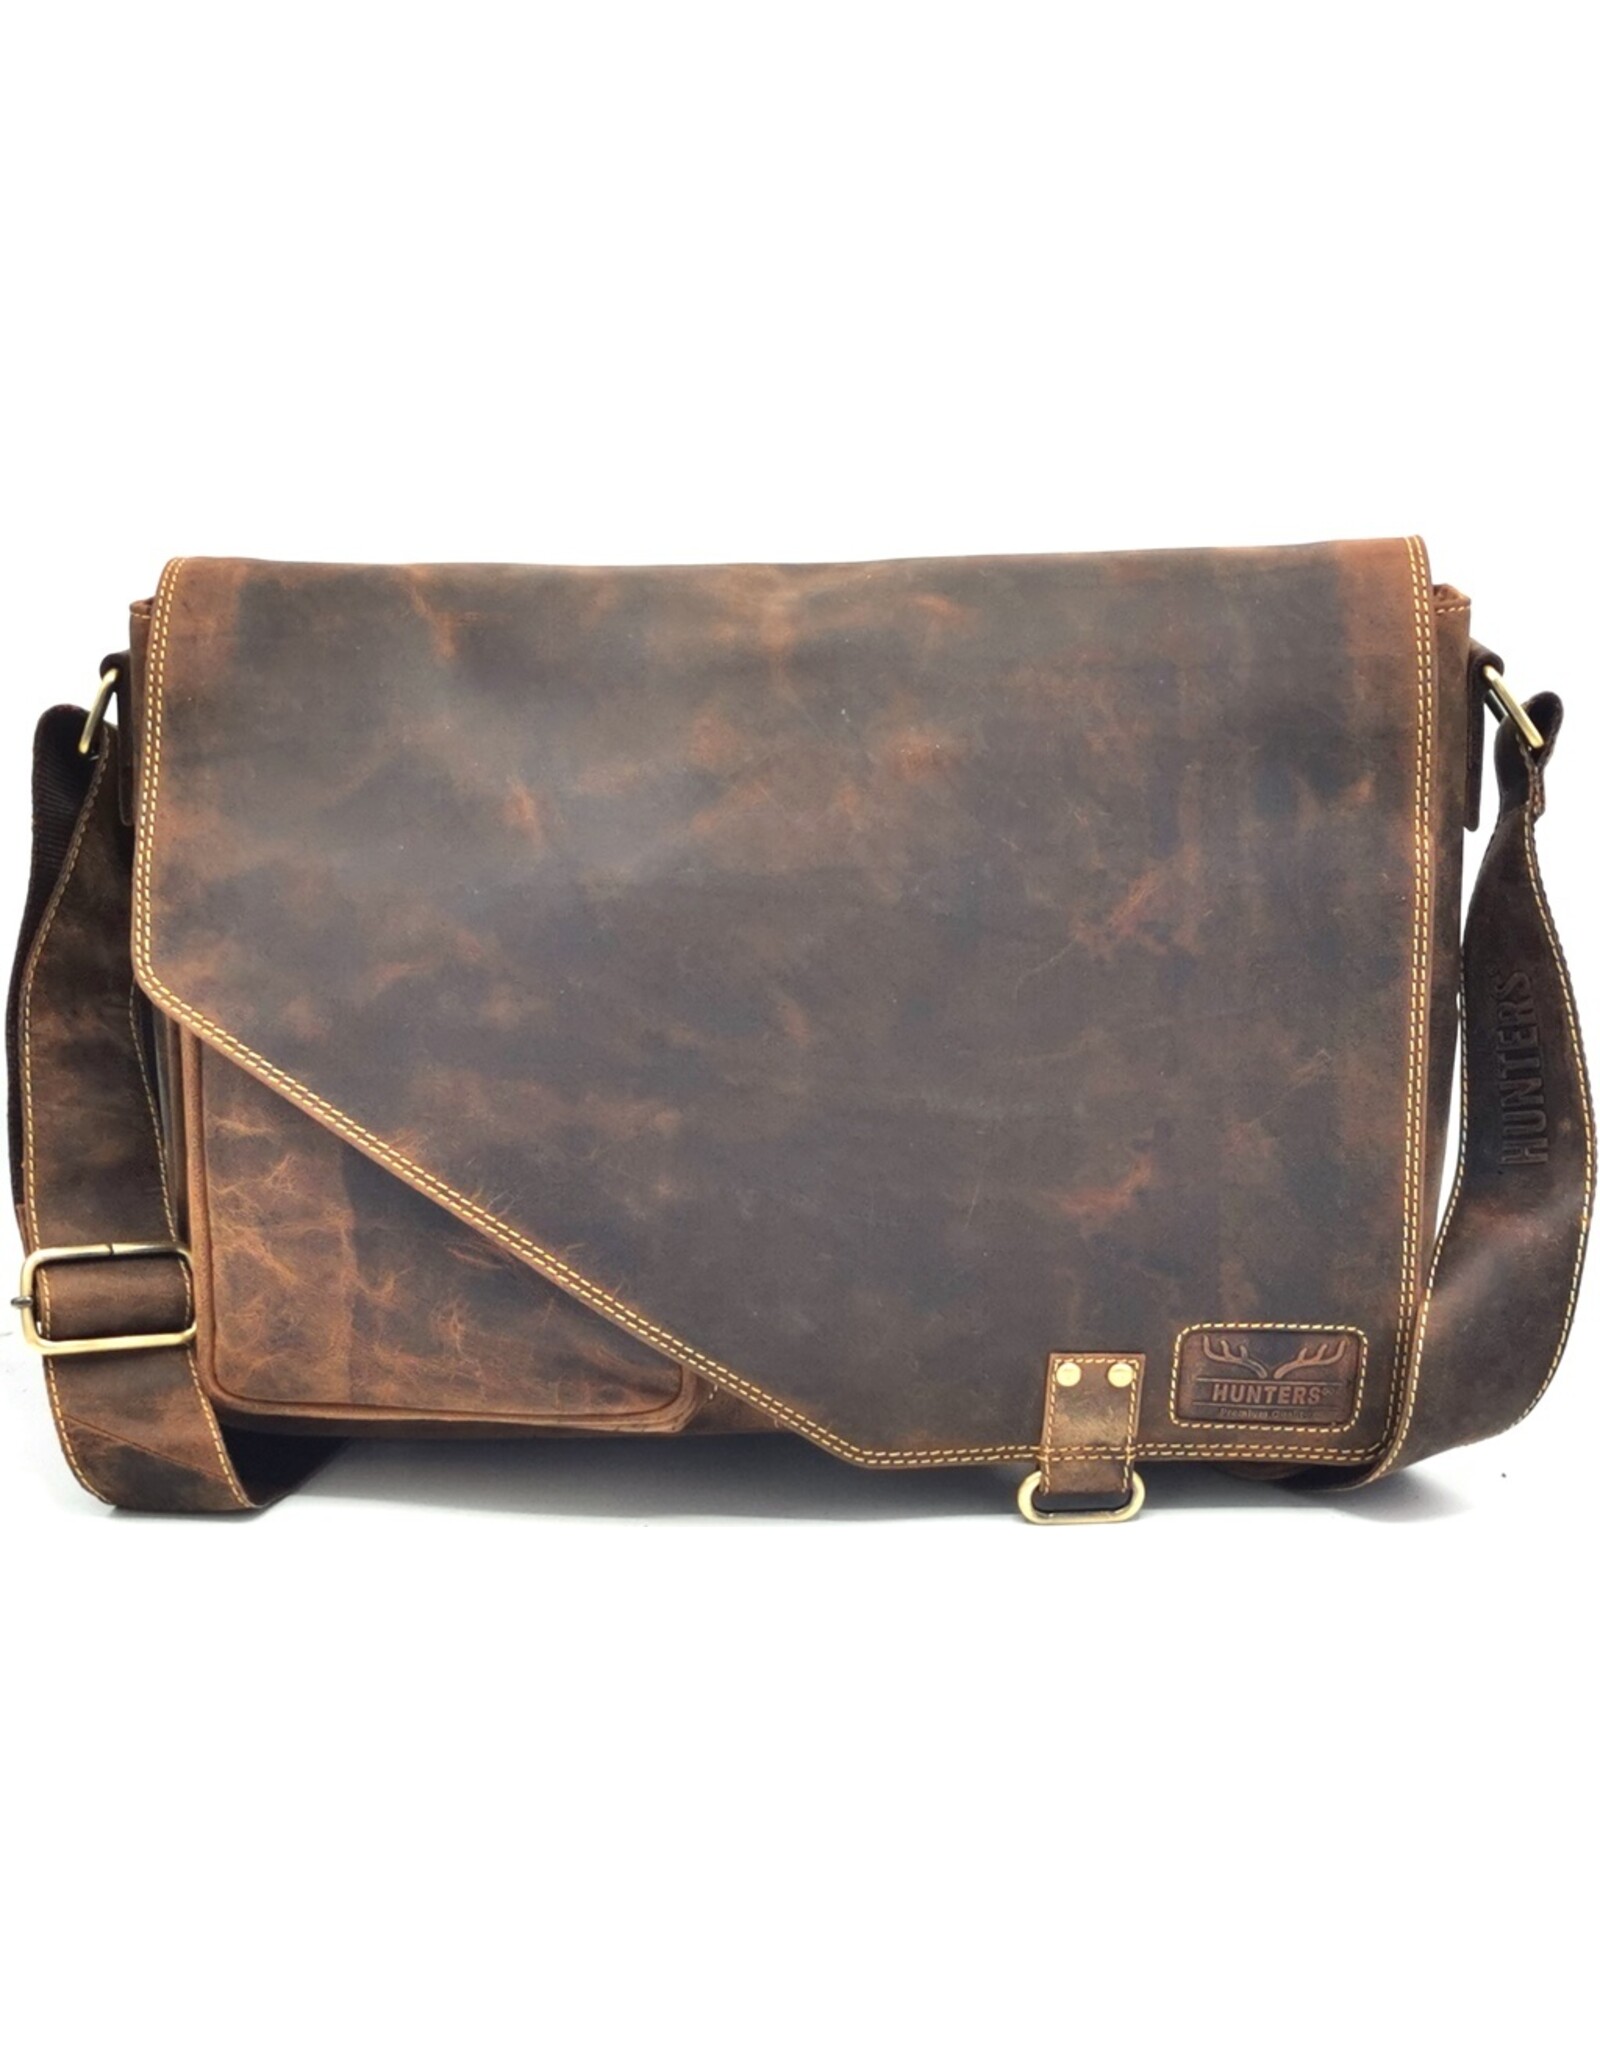 Hunters Leather Workbags and Leather Laptop Bags - Hunters Laptop Bag Buffalo Leather XL size